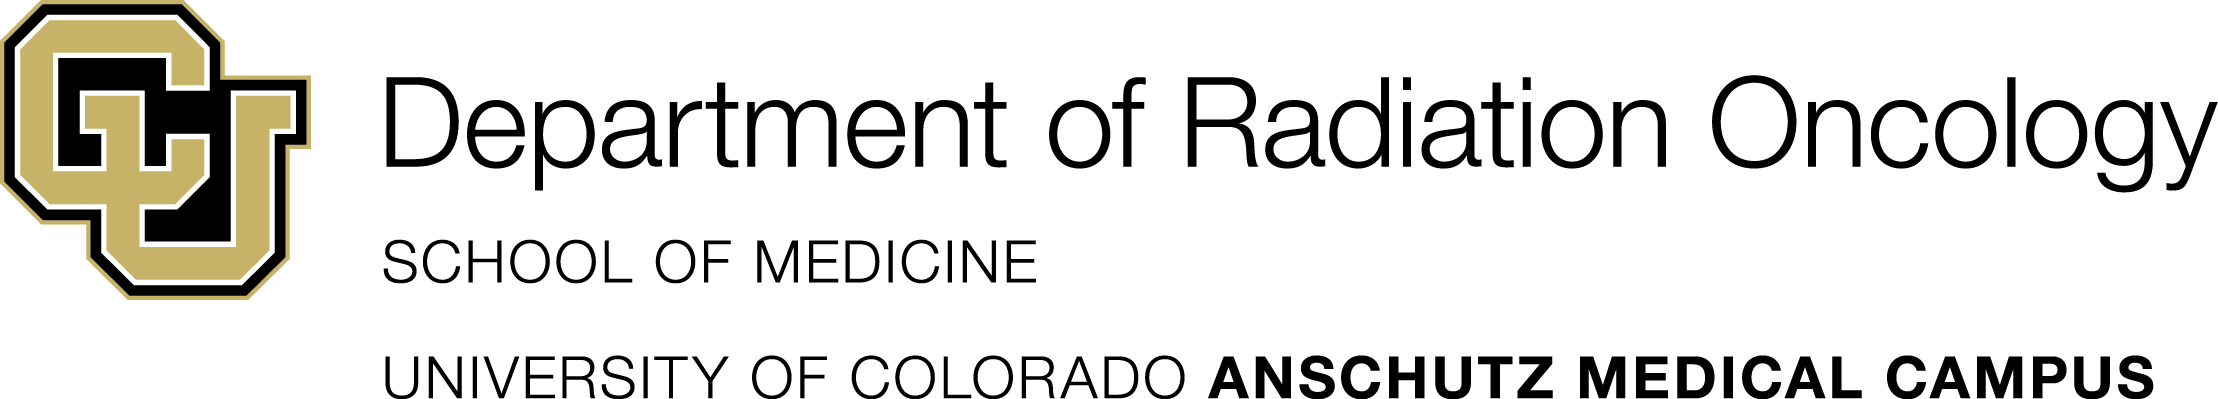 CU Department of Radiation Oncology